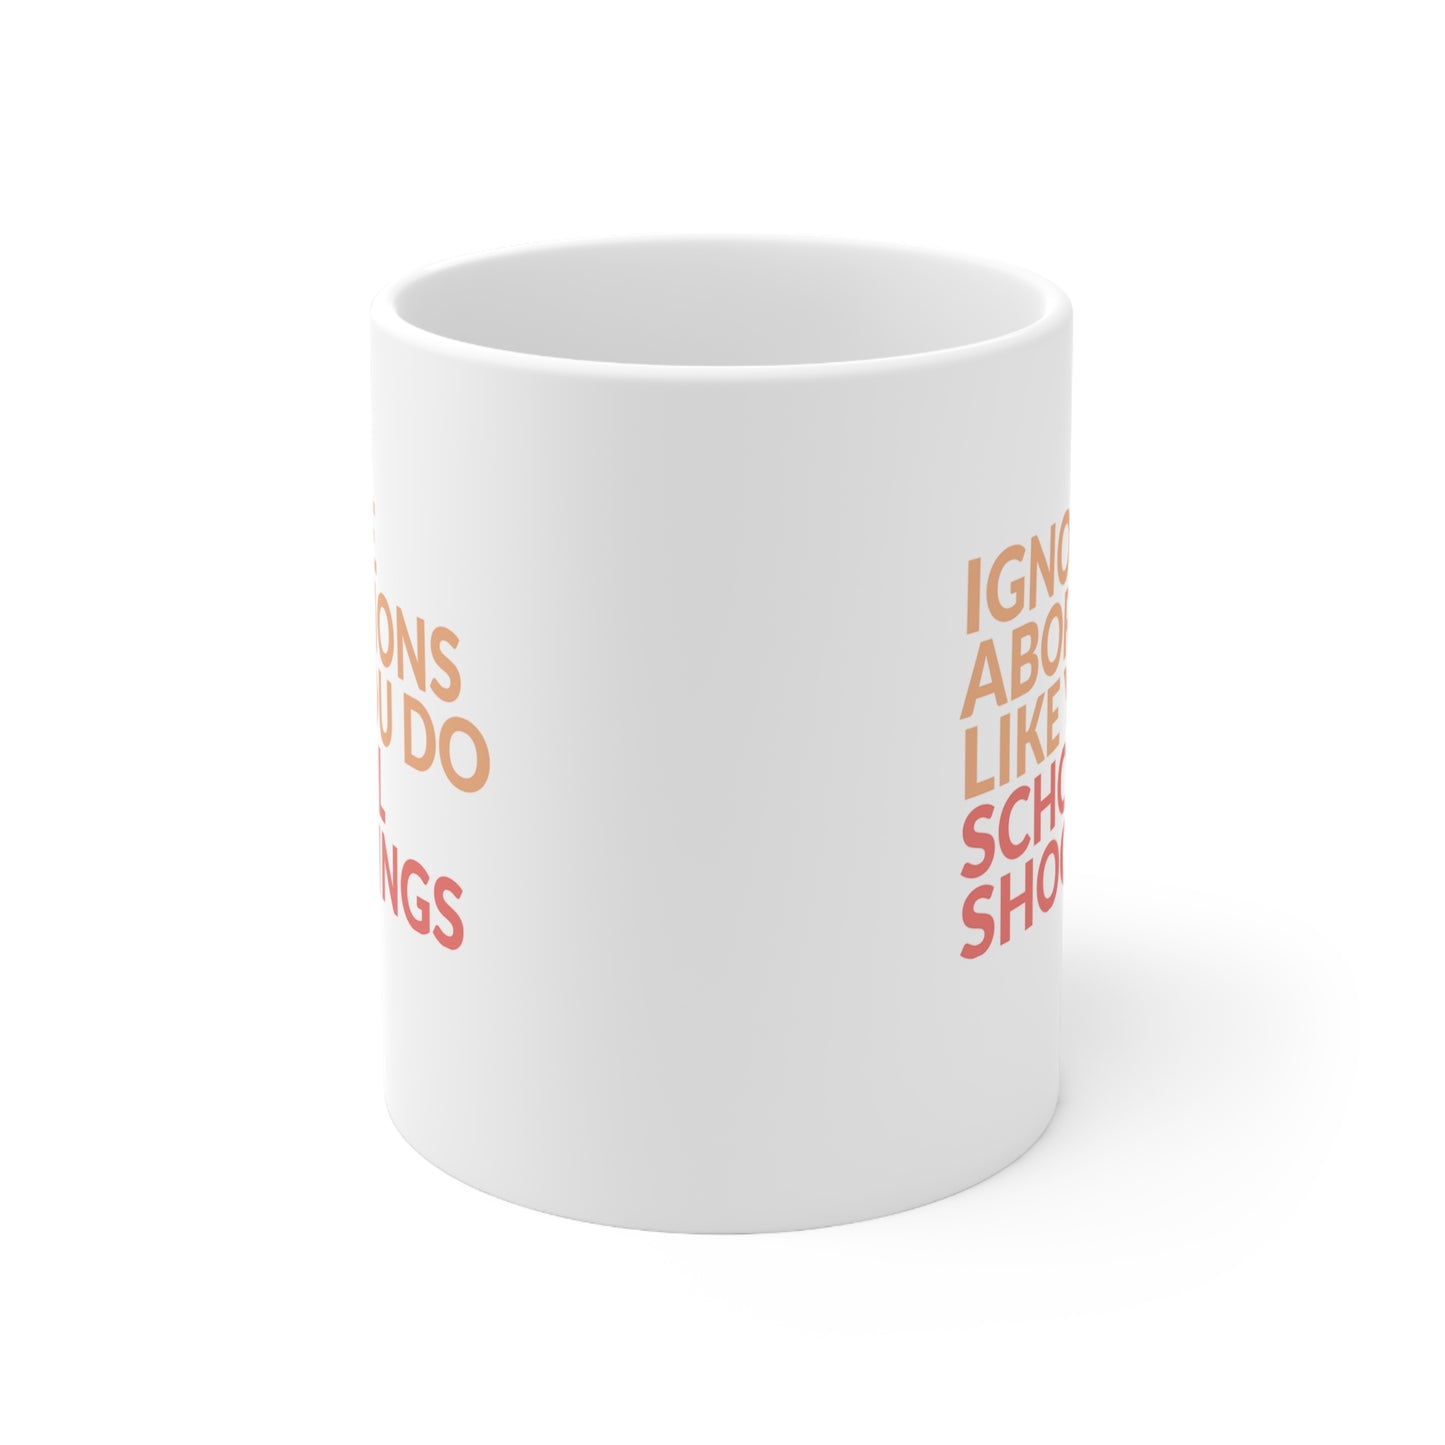 White 11oz ceramic mug that says “Ignore abortions like you do school shootings” in all caps in an orange font. The words “school shootings” are in red. This image is of the mug with the handle in the back and not visible.